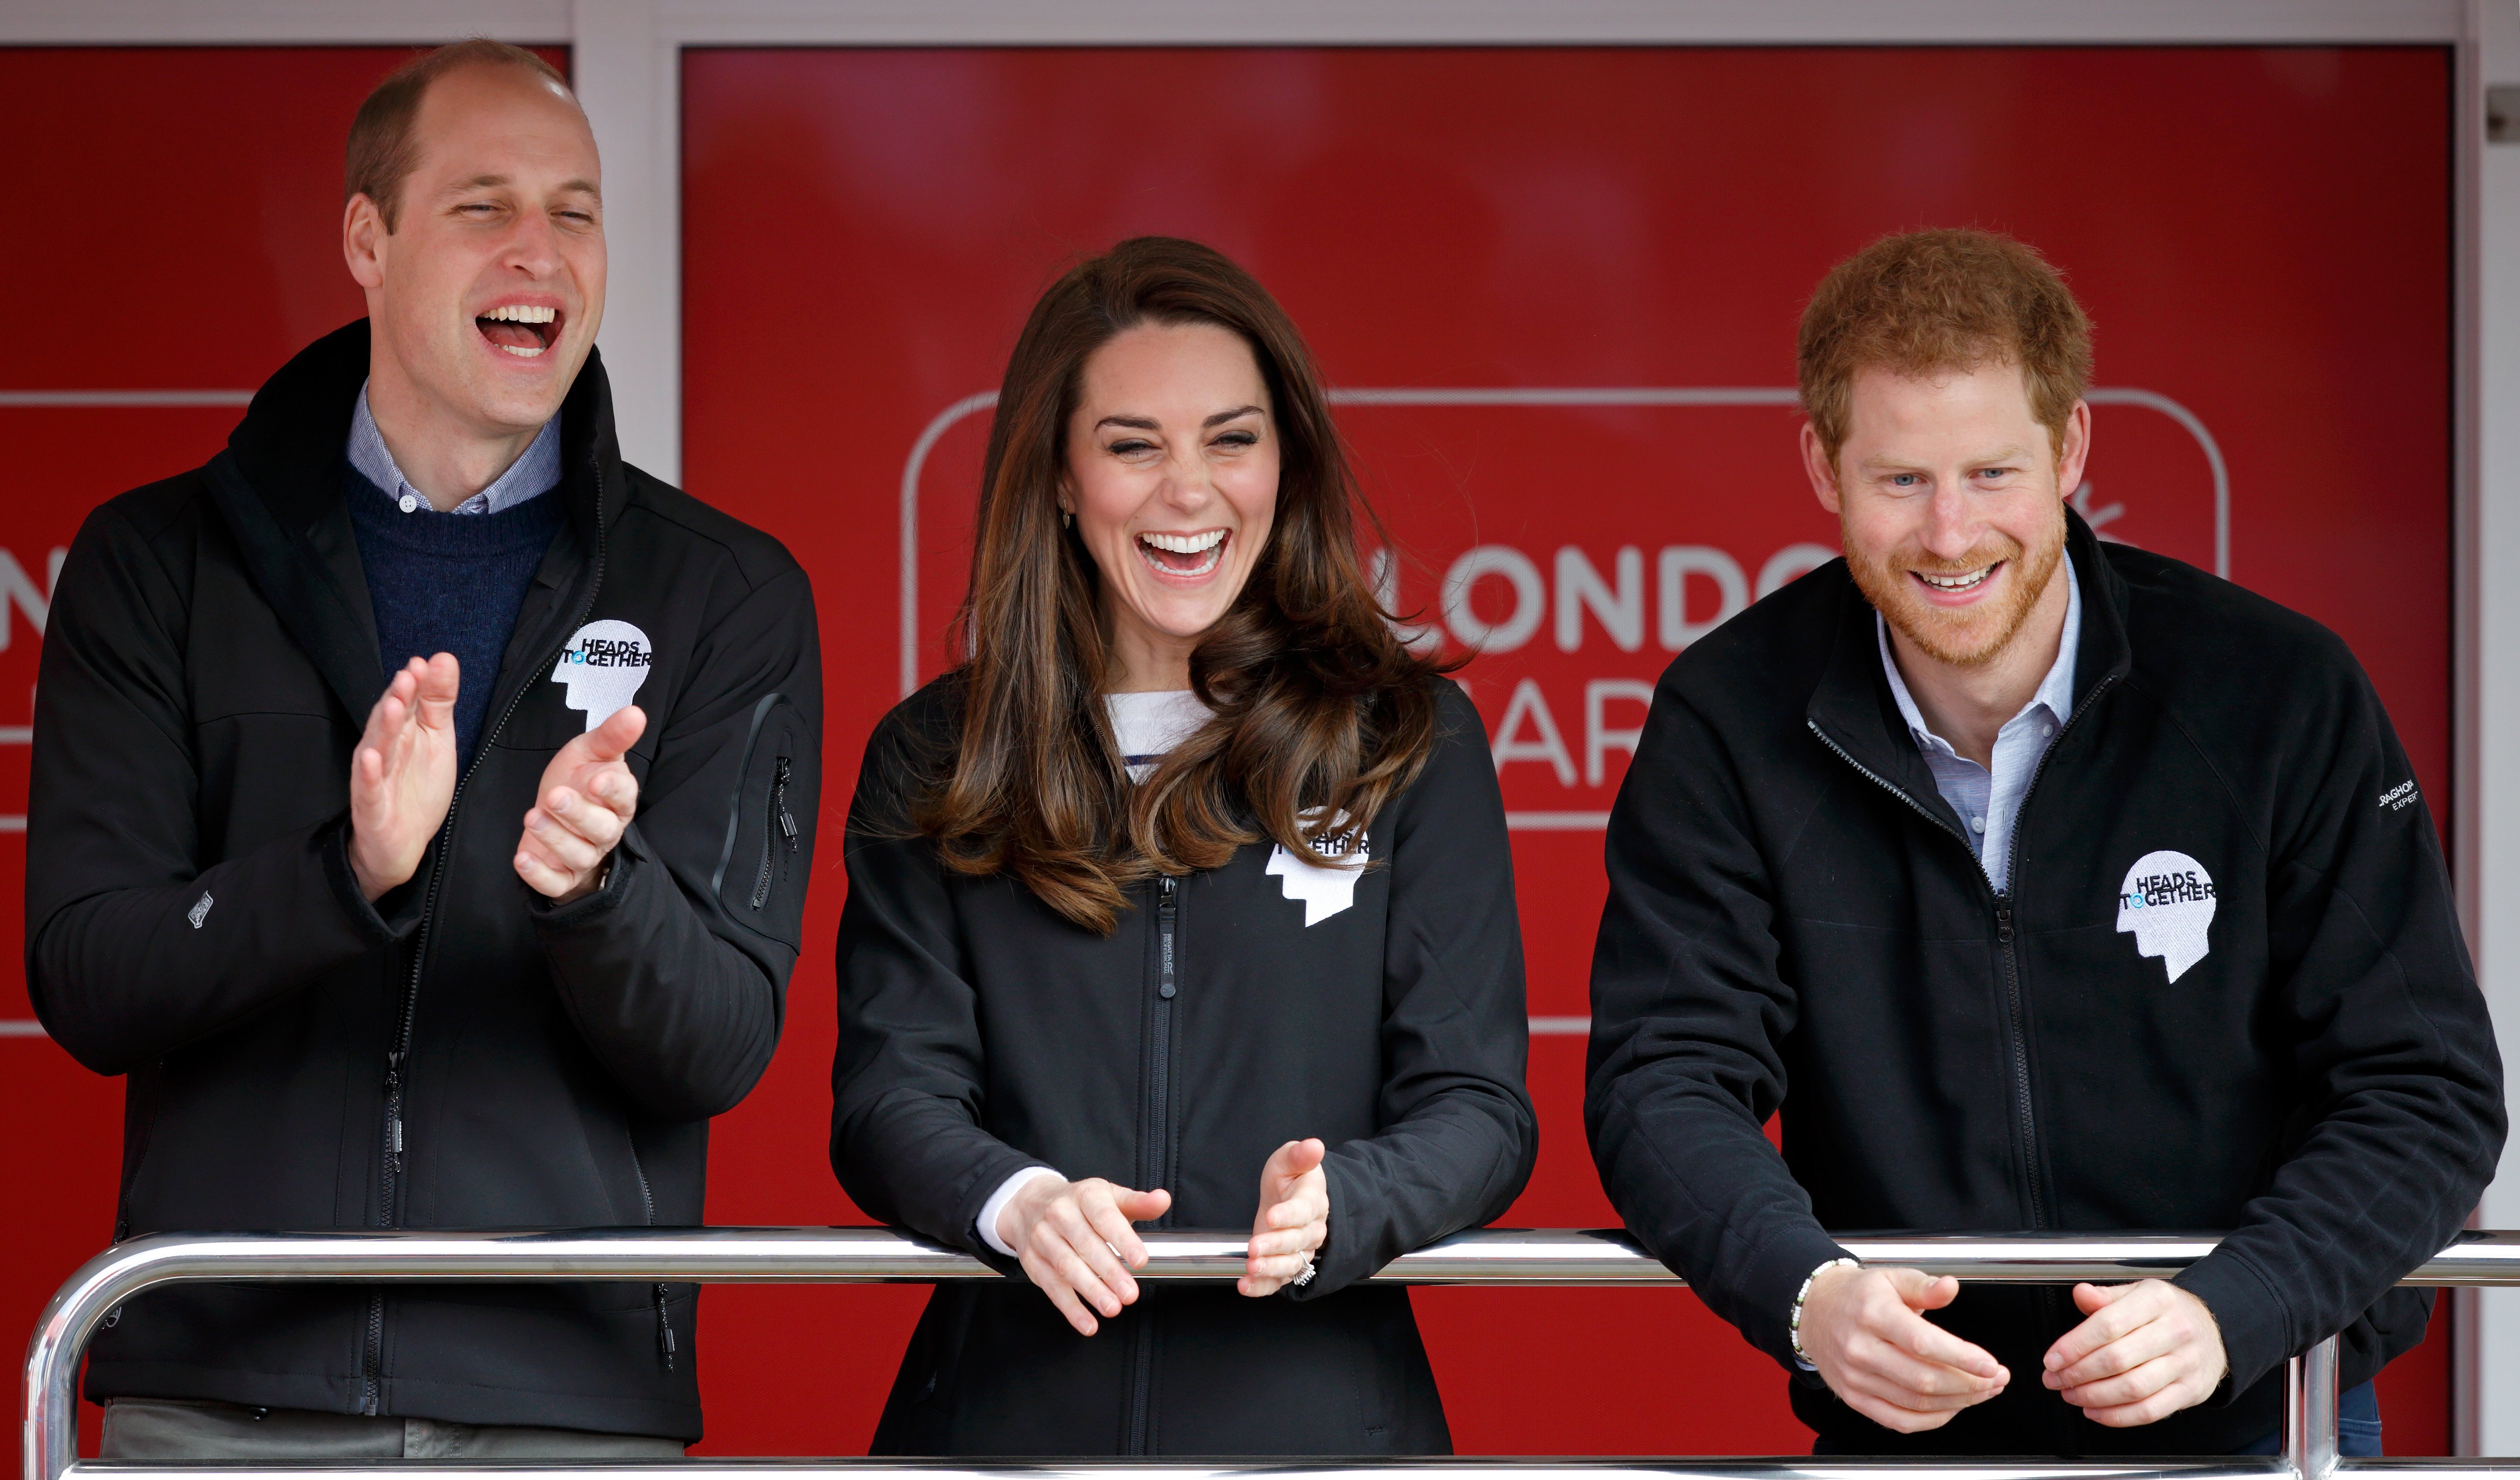 Prince William, The Prince of Wales, Catherine, The Princess of Wales and Prince Harry cheer on runners as they start the 2017 Virgin Money London Marathon on April 23, 2017 in London, England.  |  Source: Getty Images